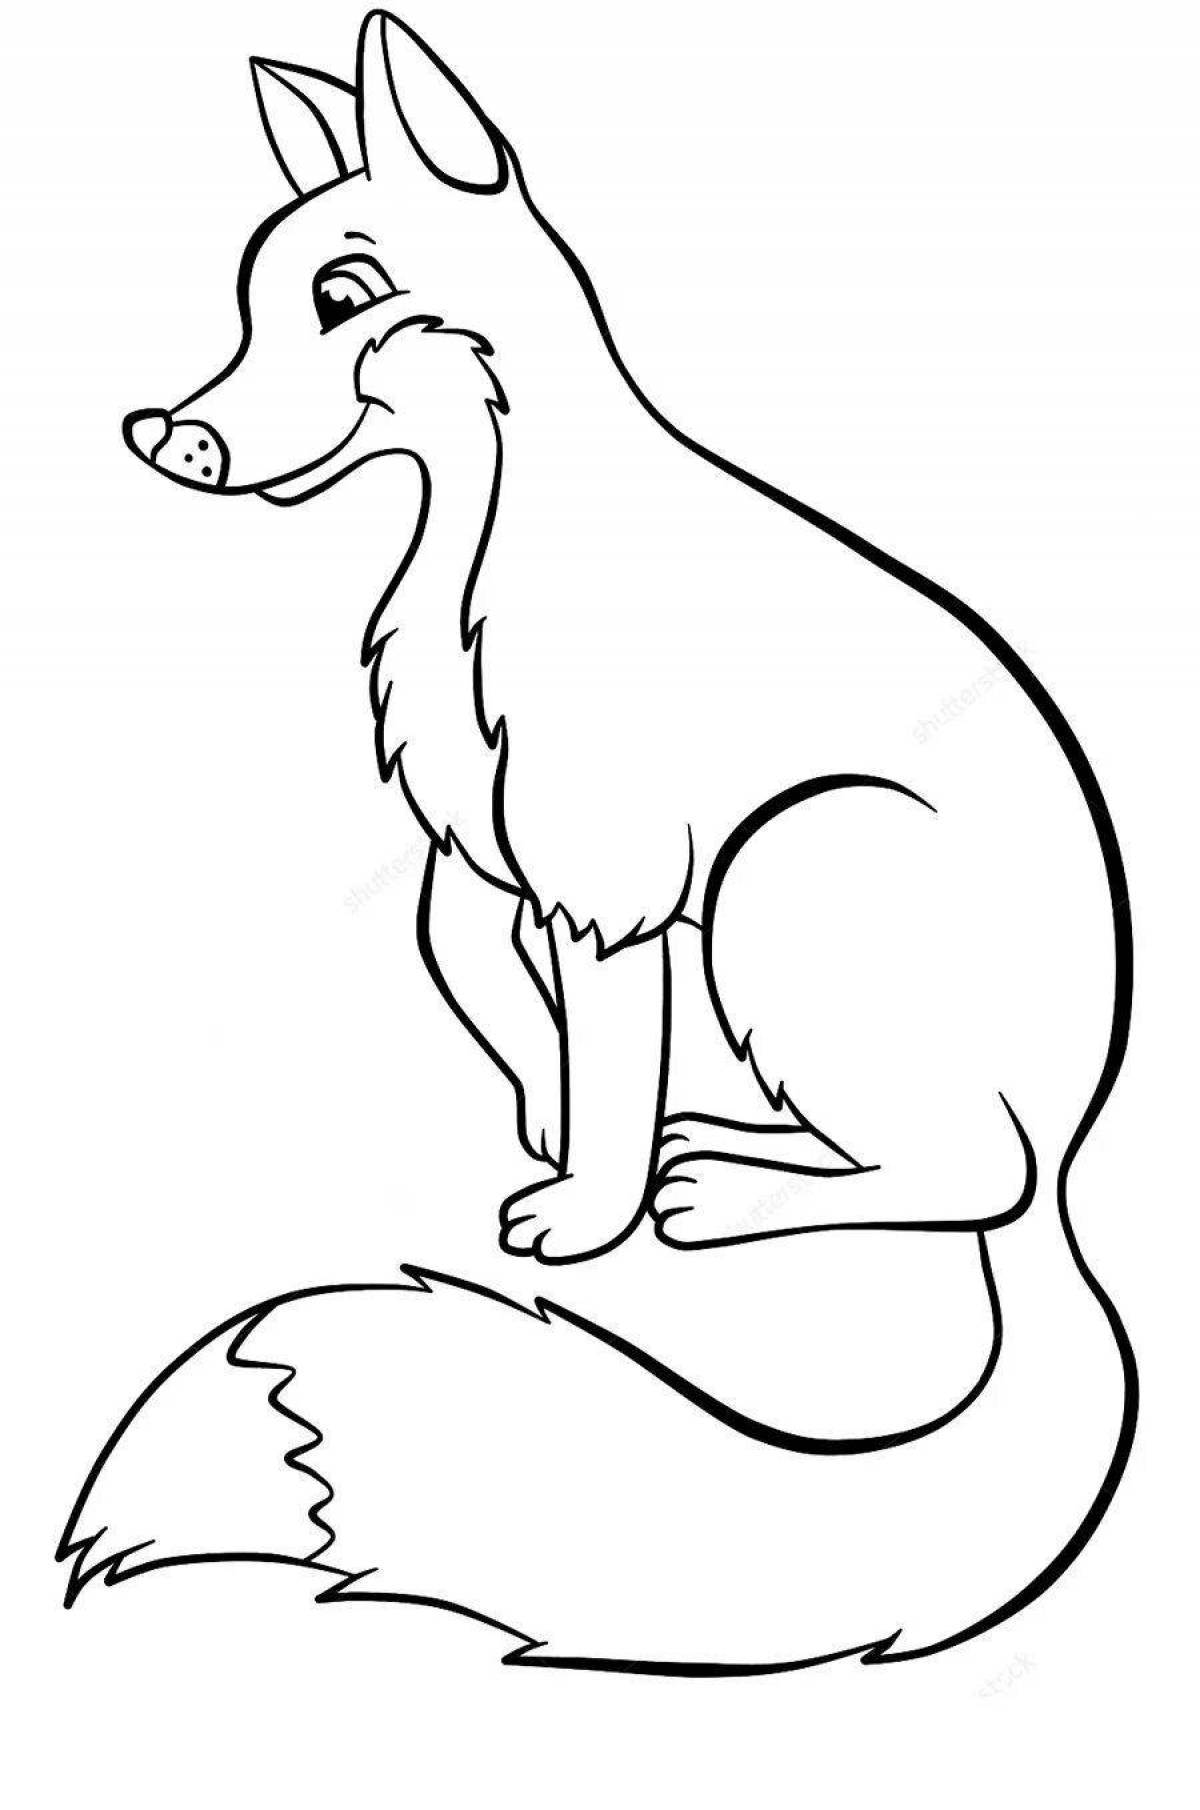 Glowing fox tail coloring page